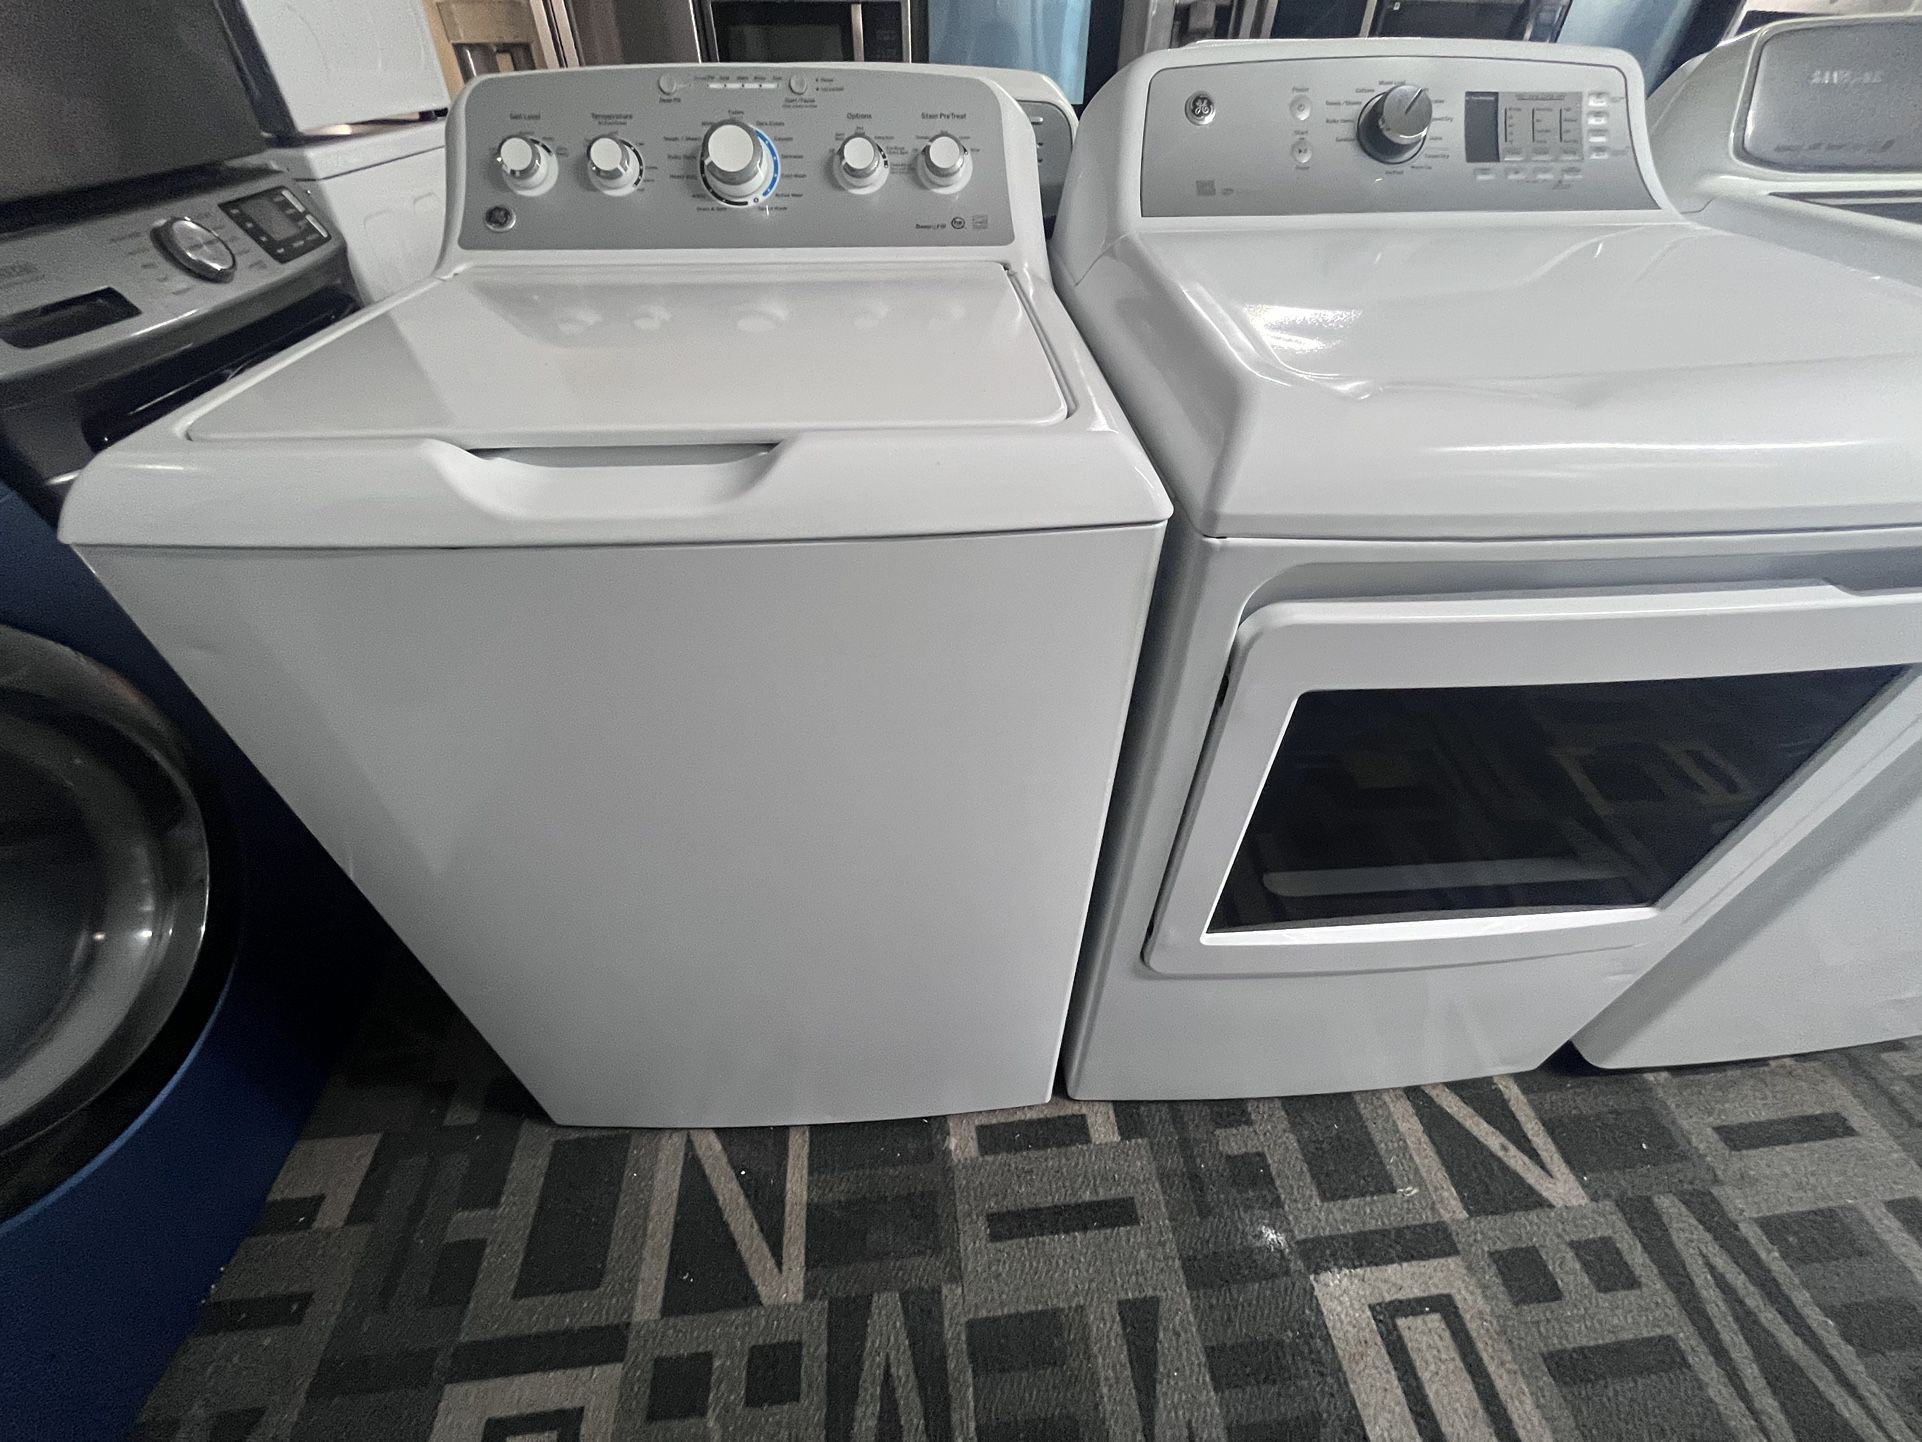 Ge Top Loader Washer And Dryer